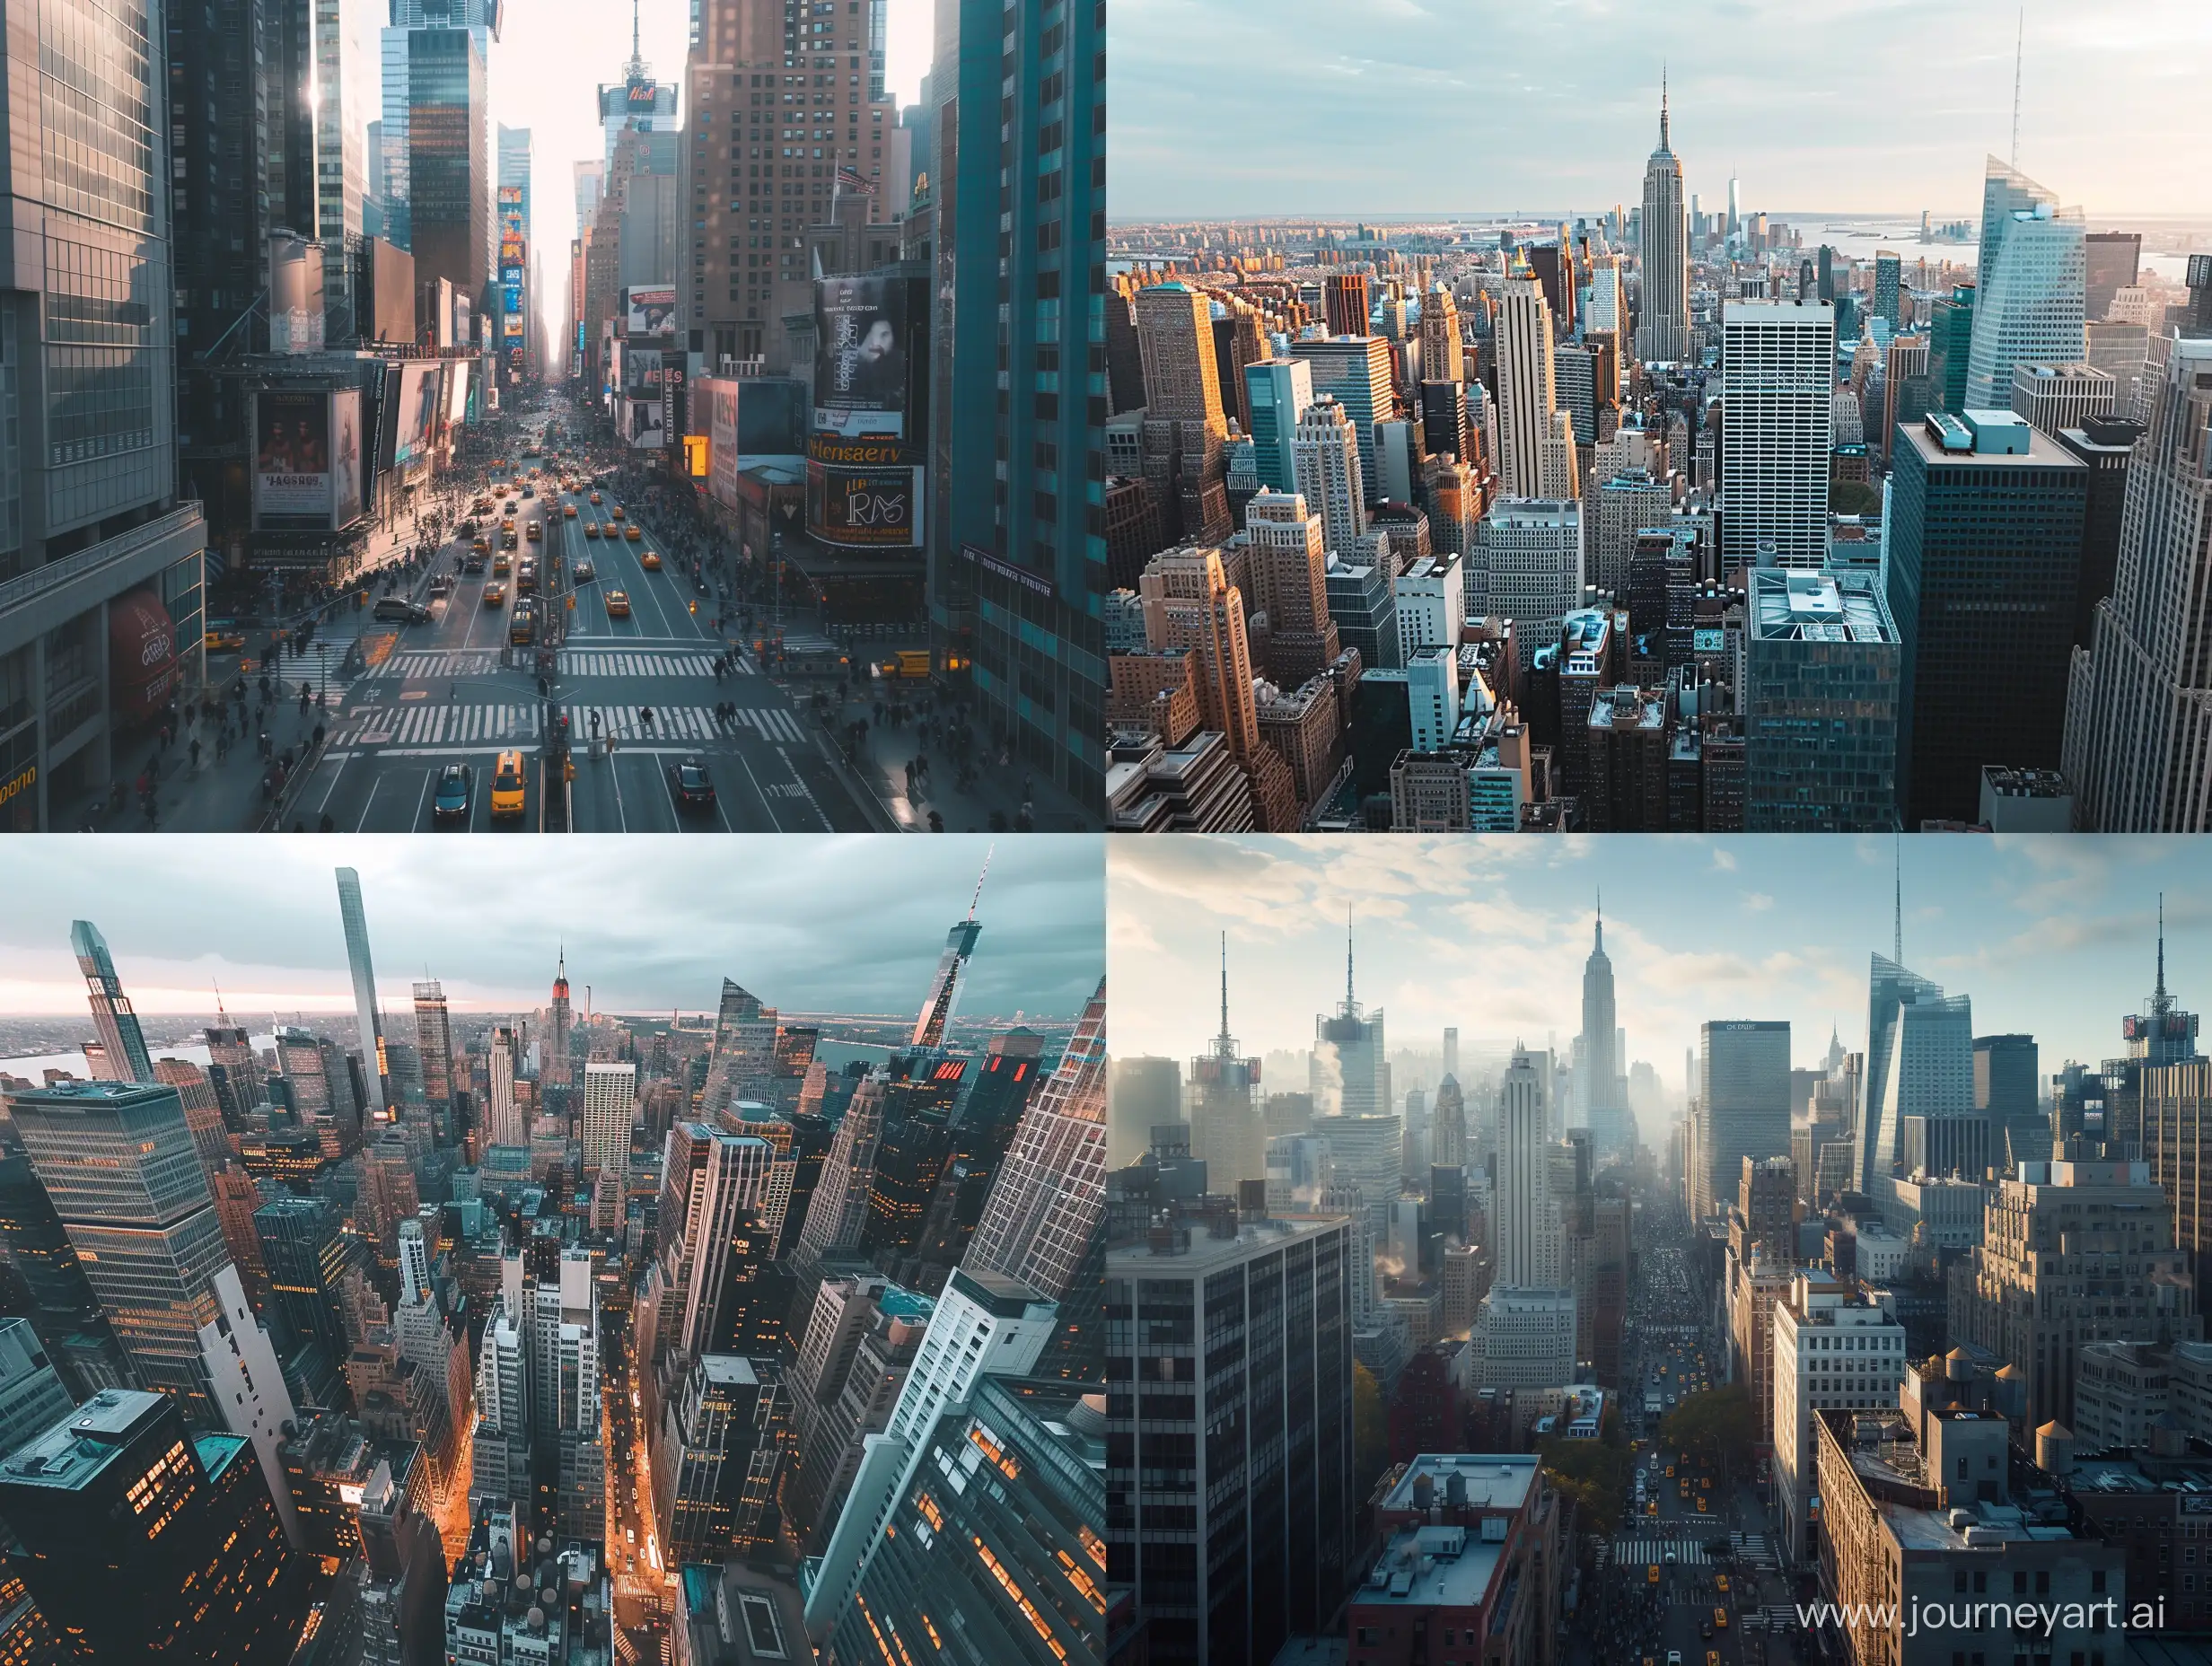 a bustling new new york city, the photo is bathed in natural lighting, day time setting. Shot in 4k with a high end DSLR camera. such as a Canon EOS R5 with a 50mm f/1. 2 lens, architecture, drone view, skyline, 